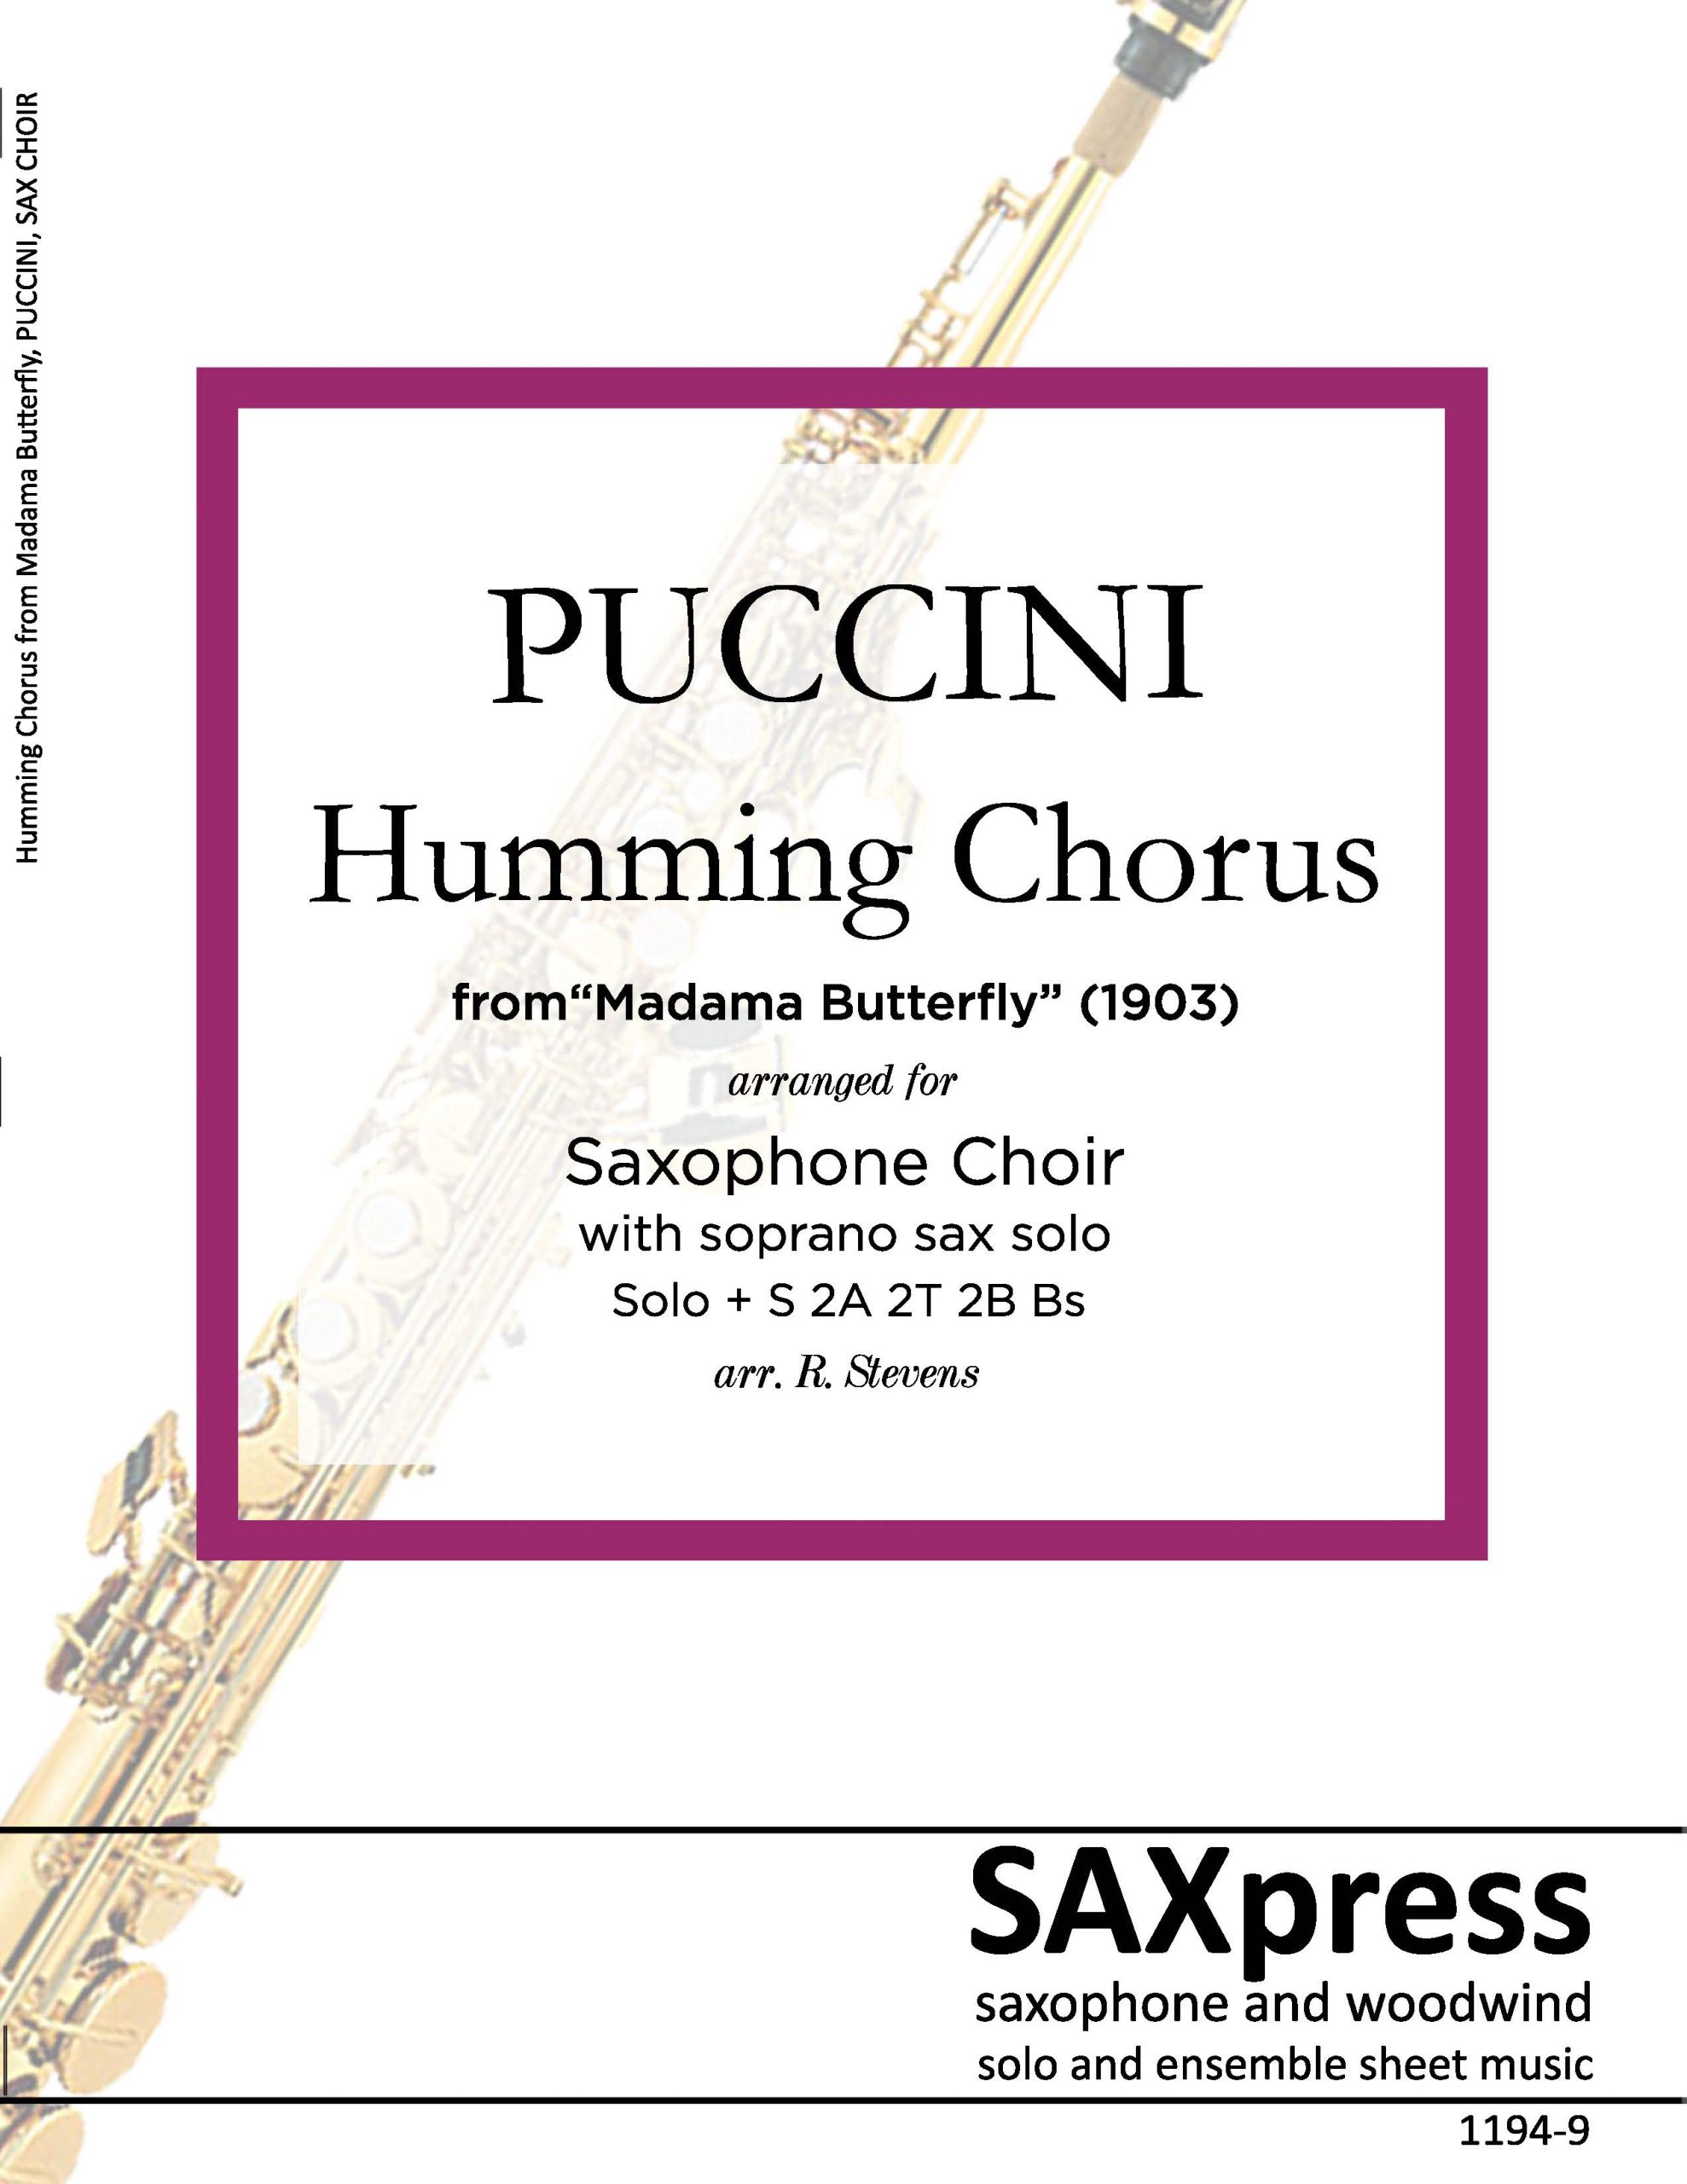 https://saxpress.com/wp-content/uploads/2024/02/1194-9-PUCCINI-Humming-Chorus-from-Madama-Butterfly-FRONT-COVER-scaled.jpg